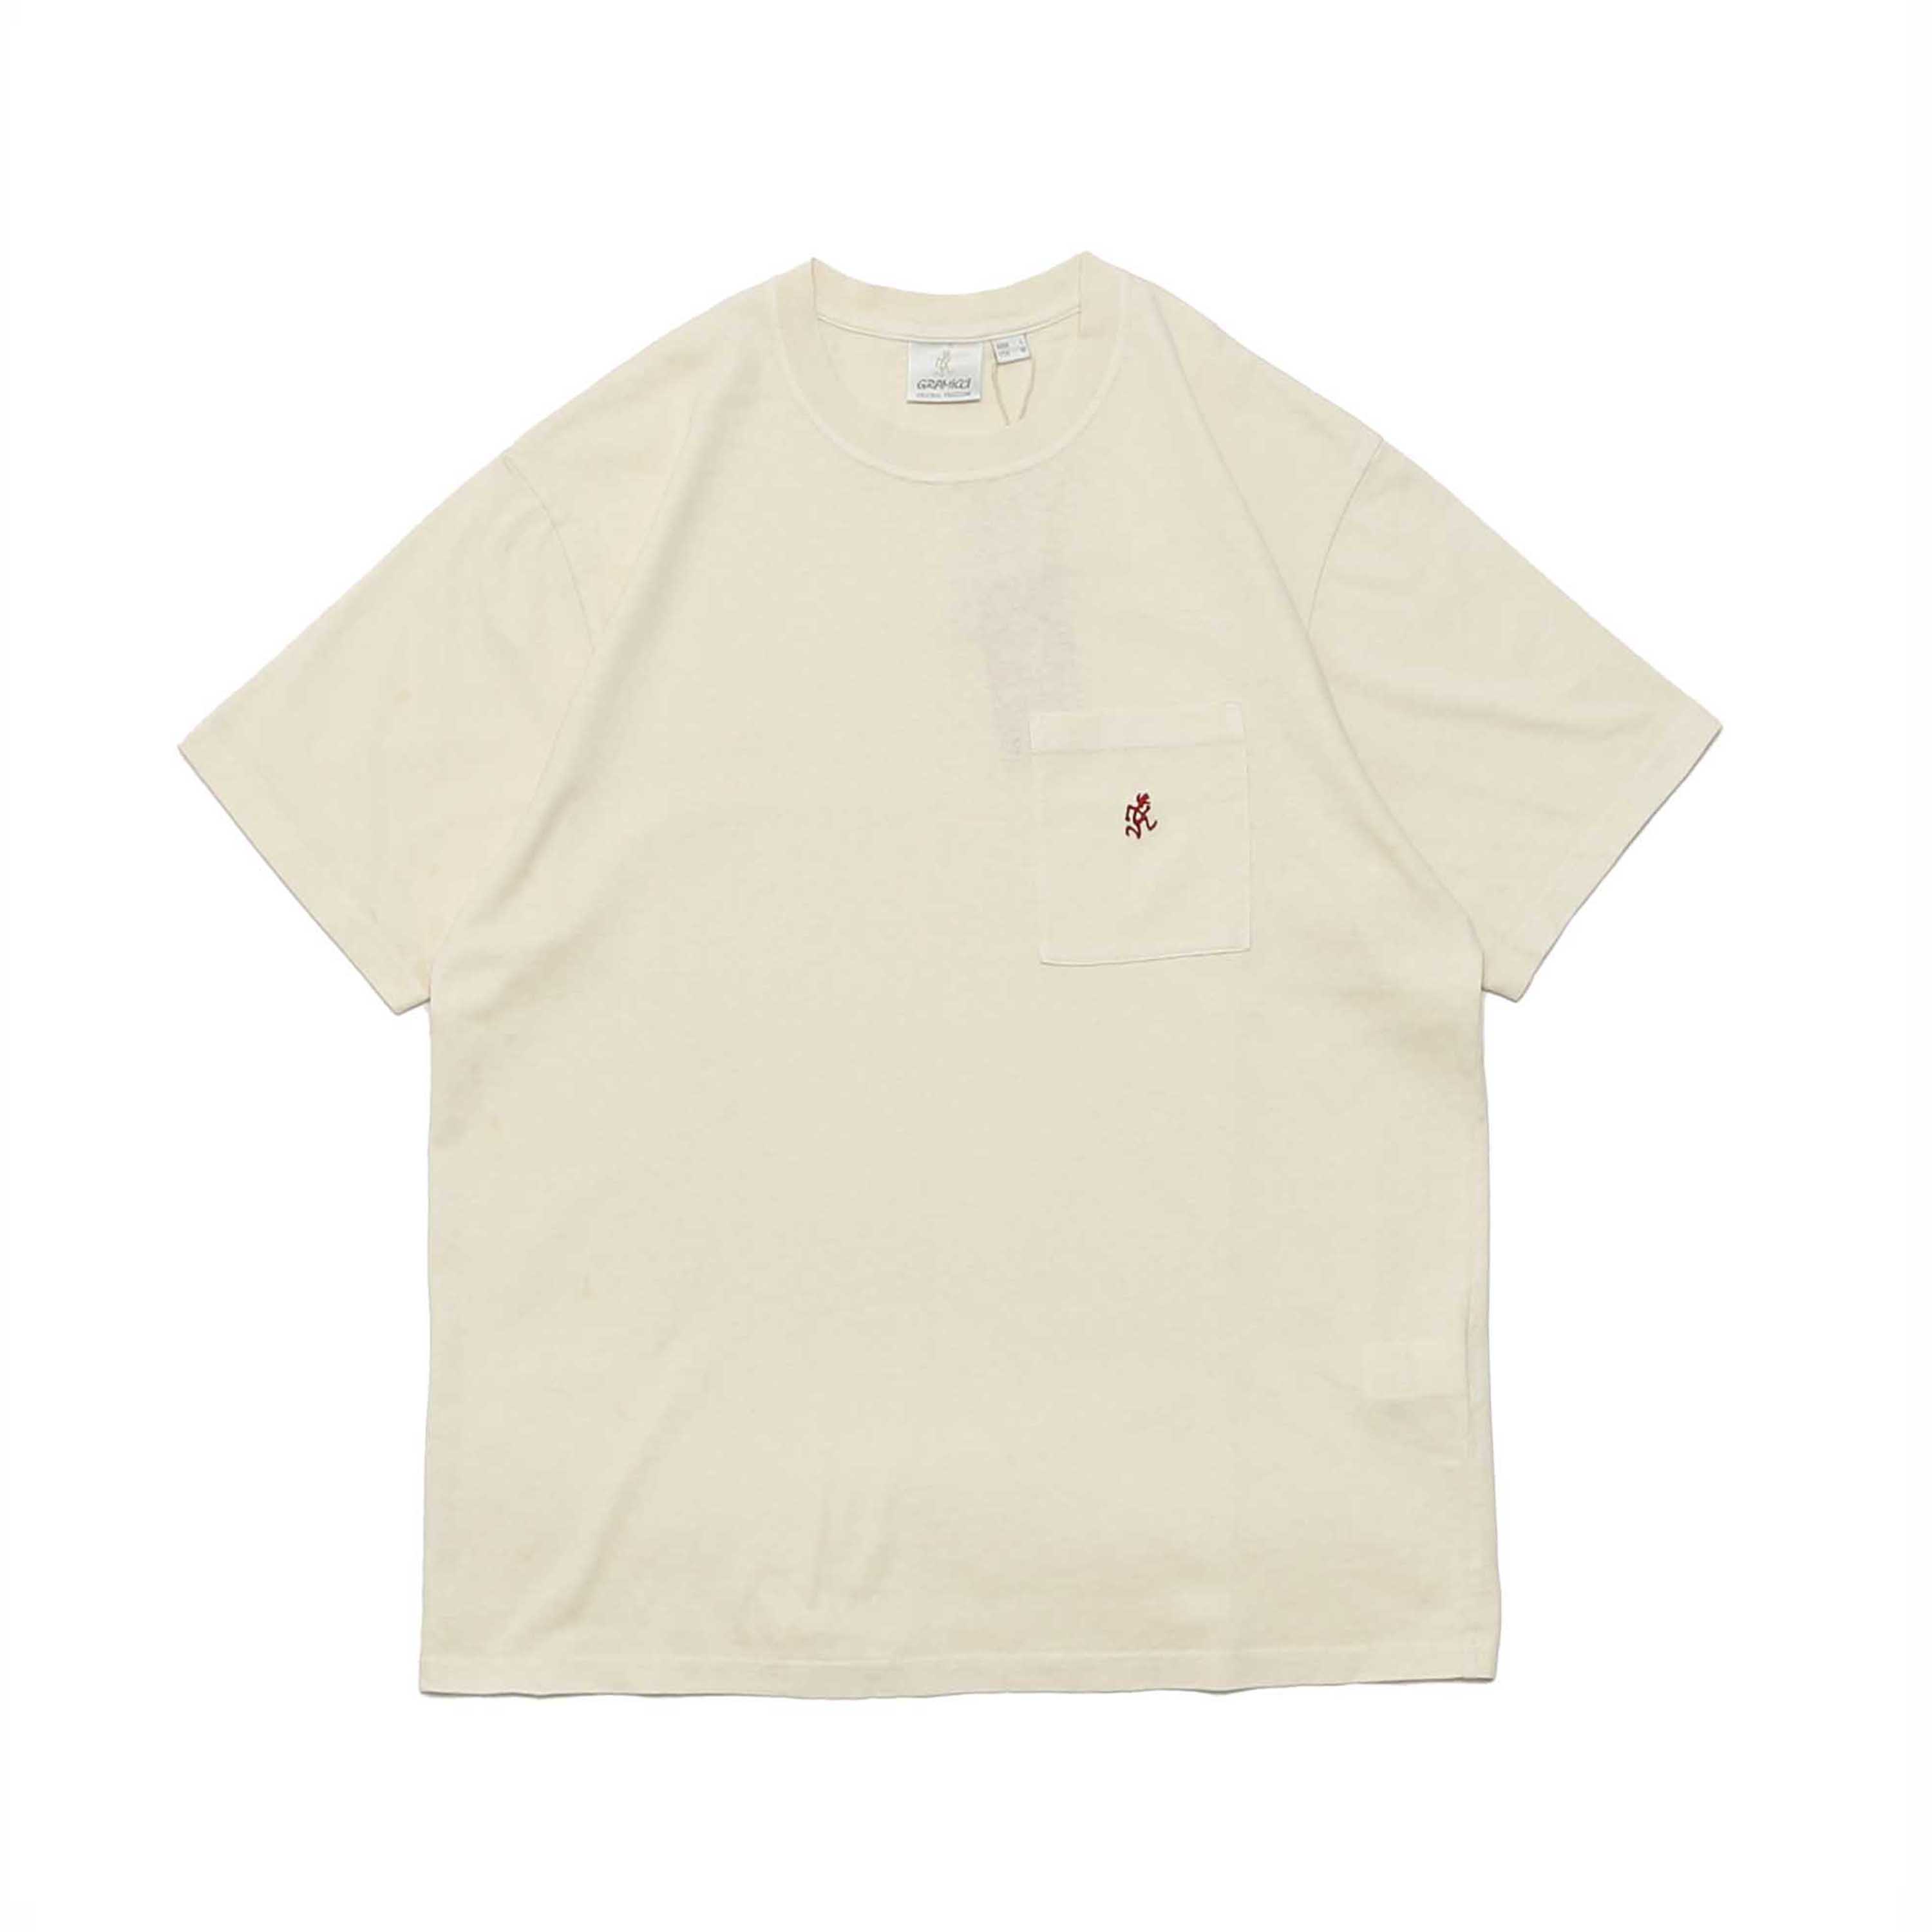 ONE POINT S/S TEE - SAND PIGMENT